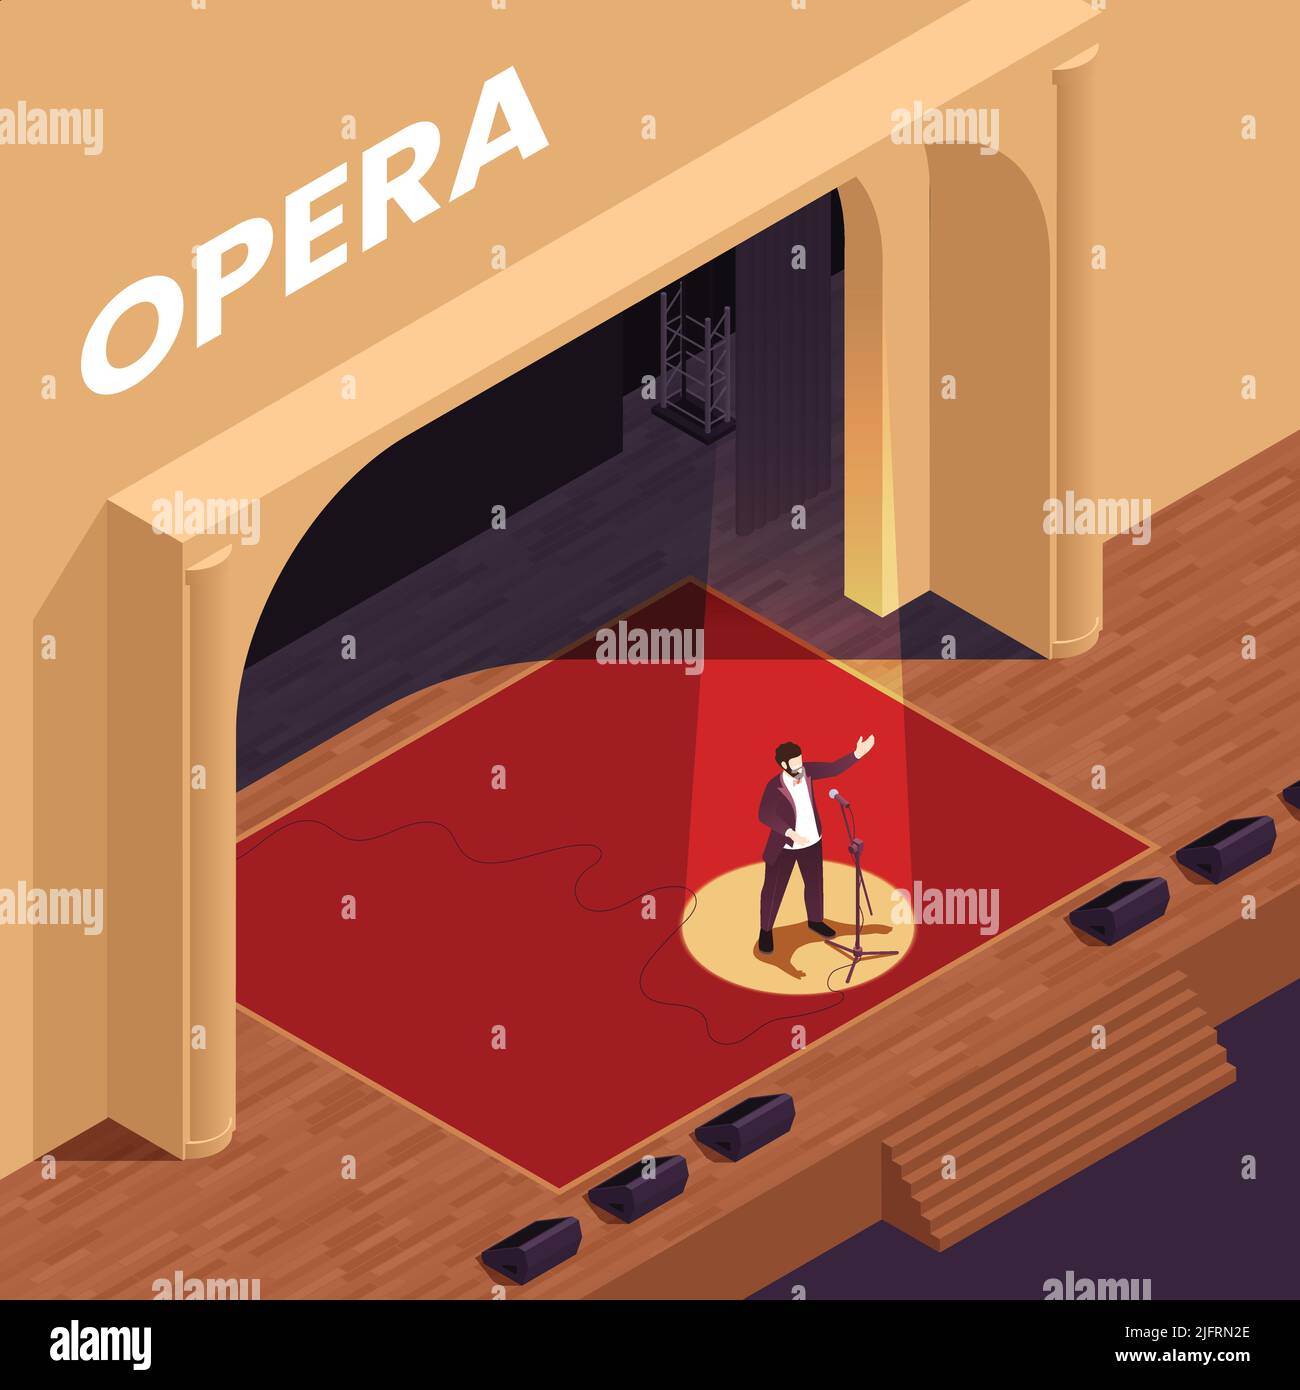 Opera theatre isometric poster with singing performance symbols vector illustration Stock Vector